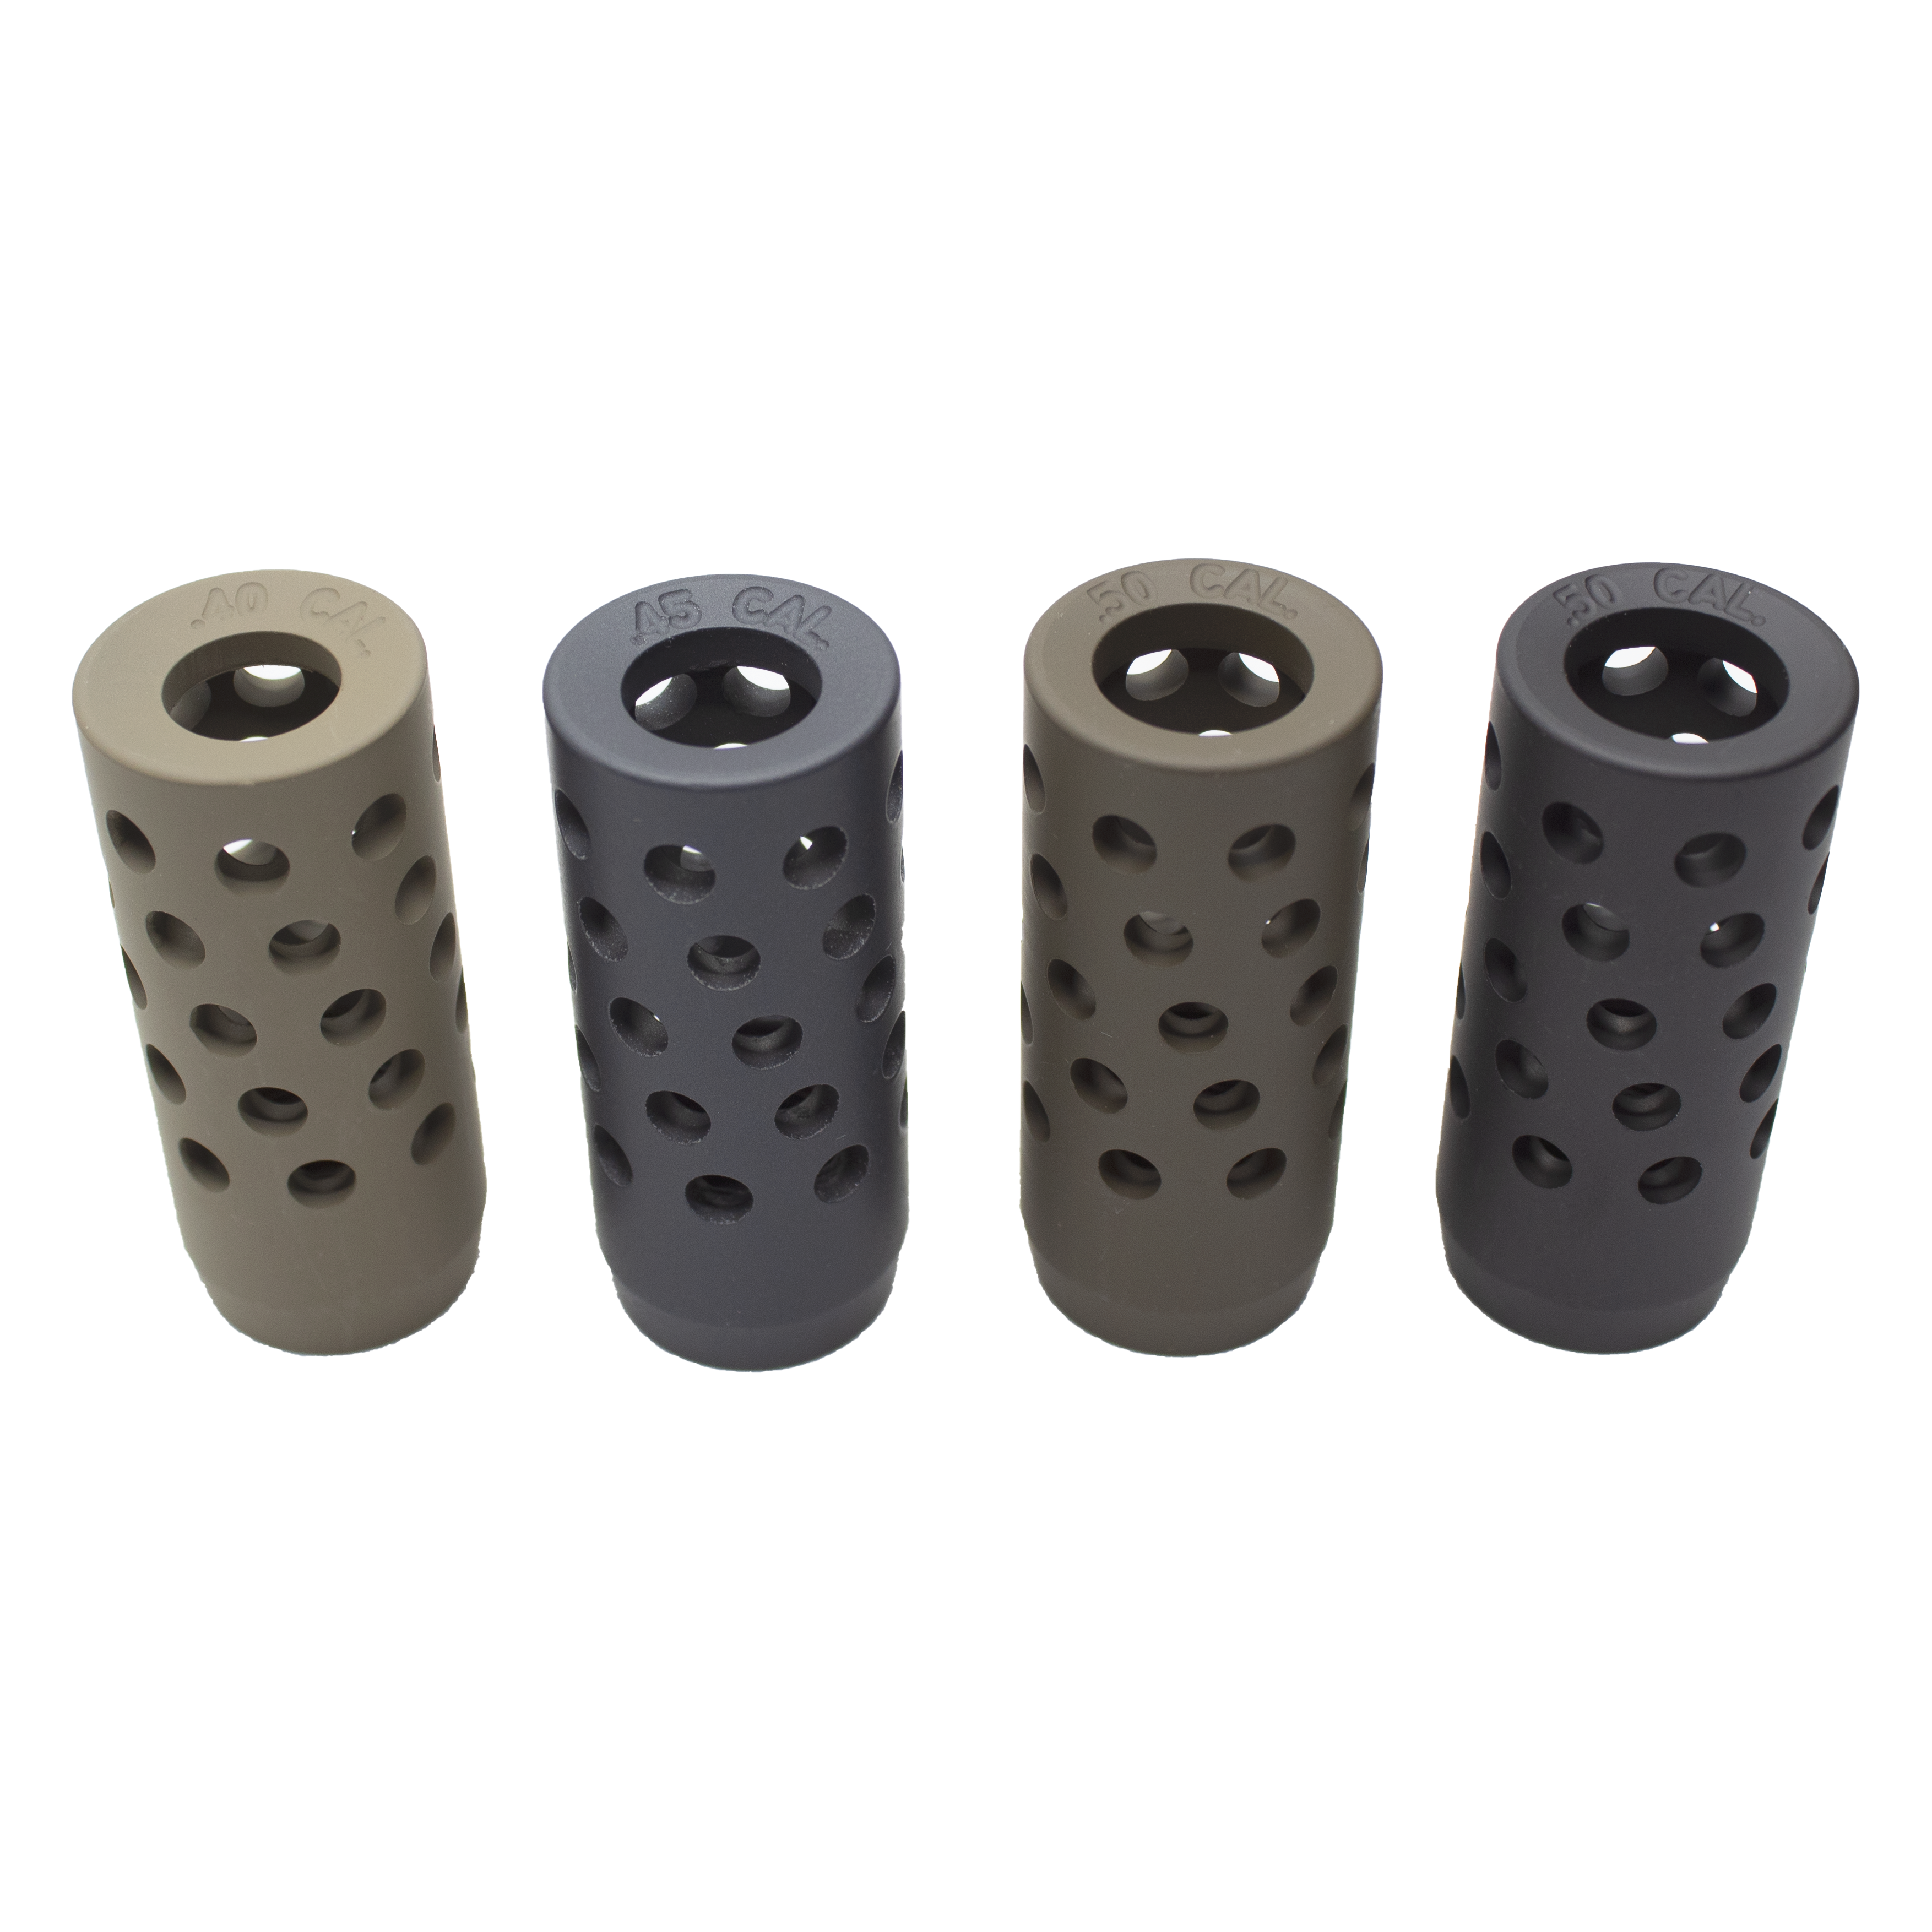 Which color muzzle brake matches the finish on Paramount pro?